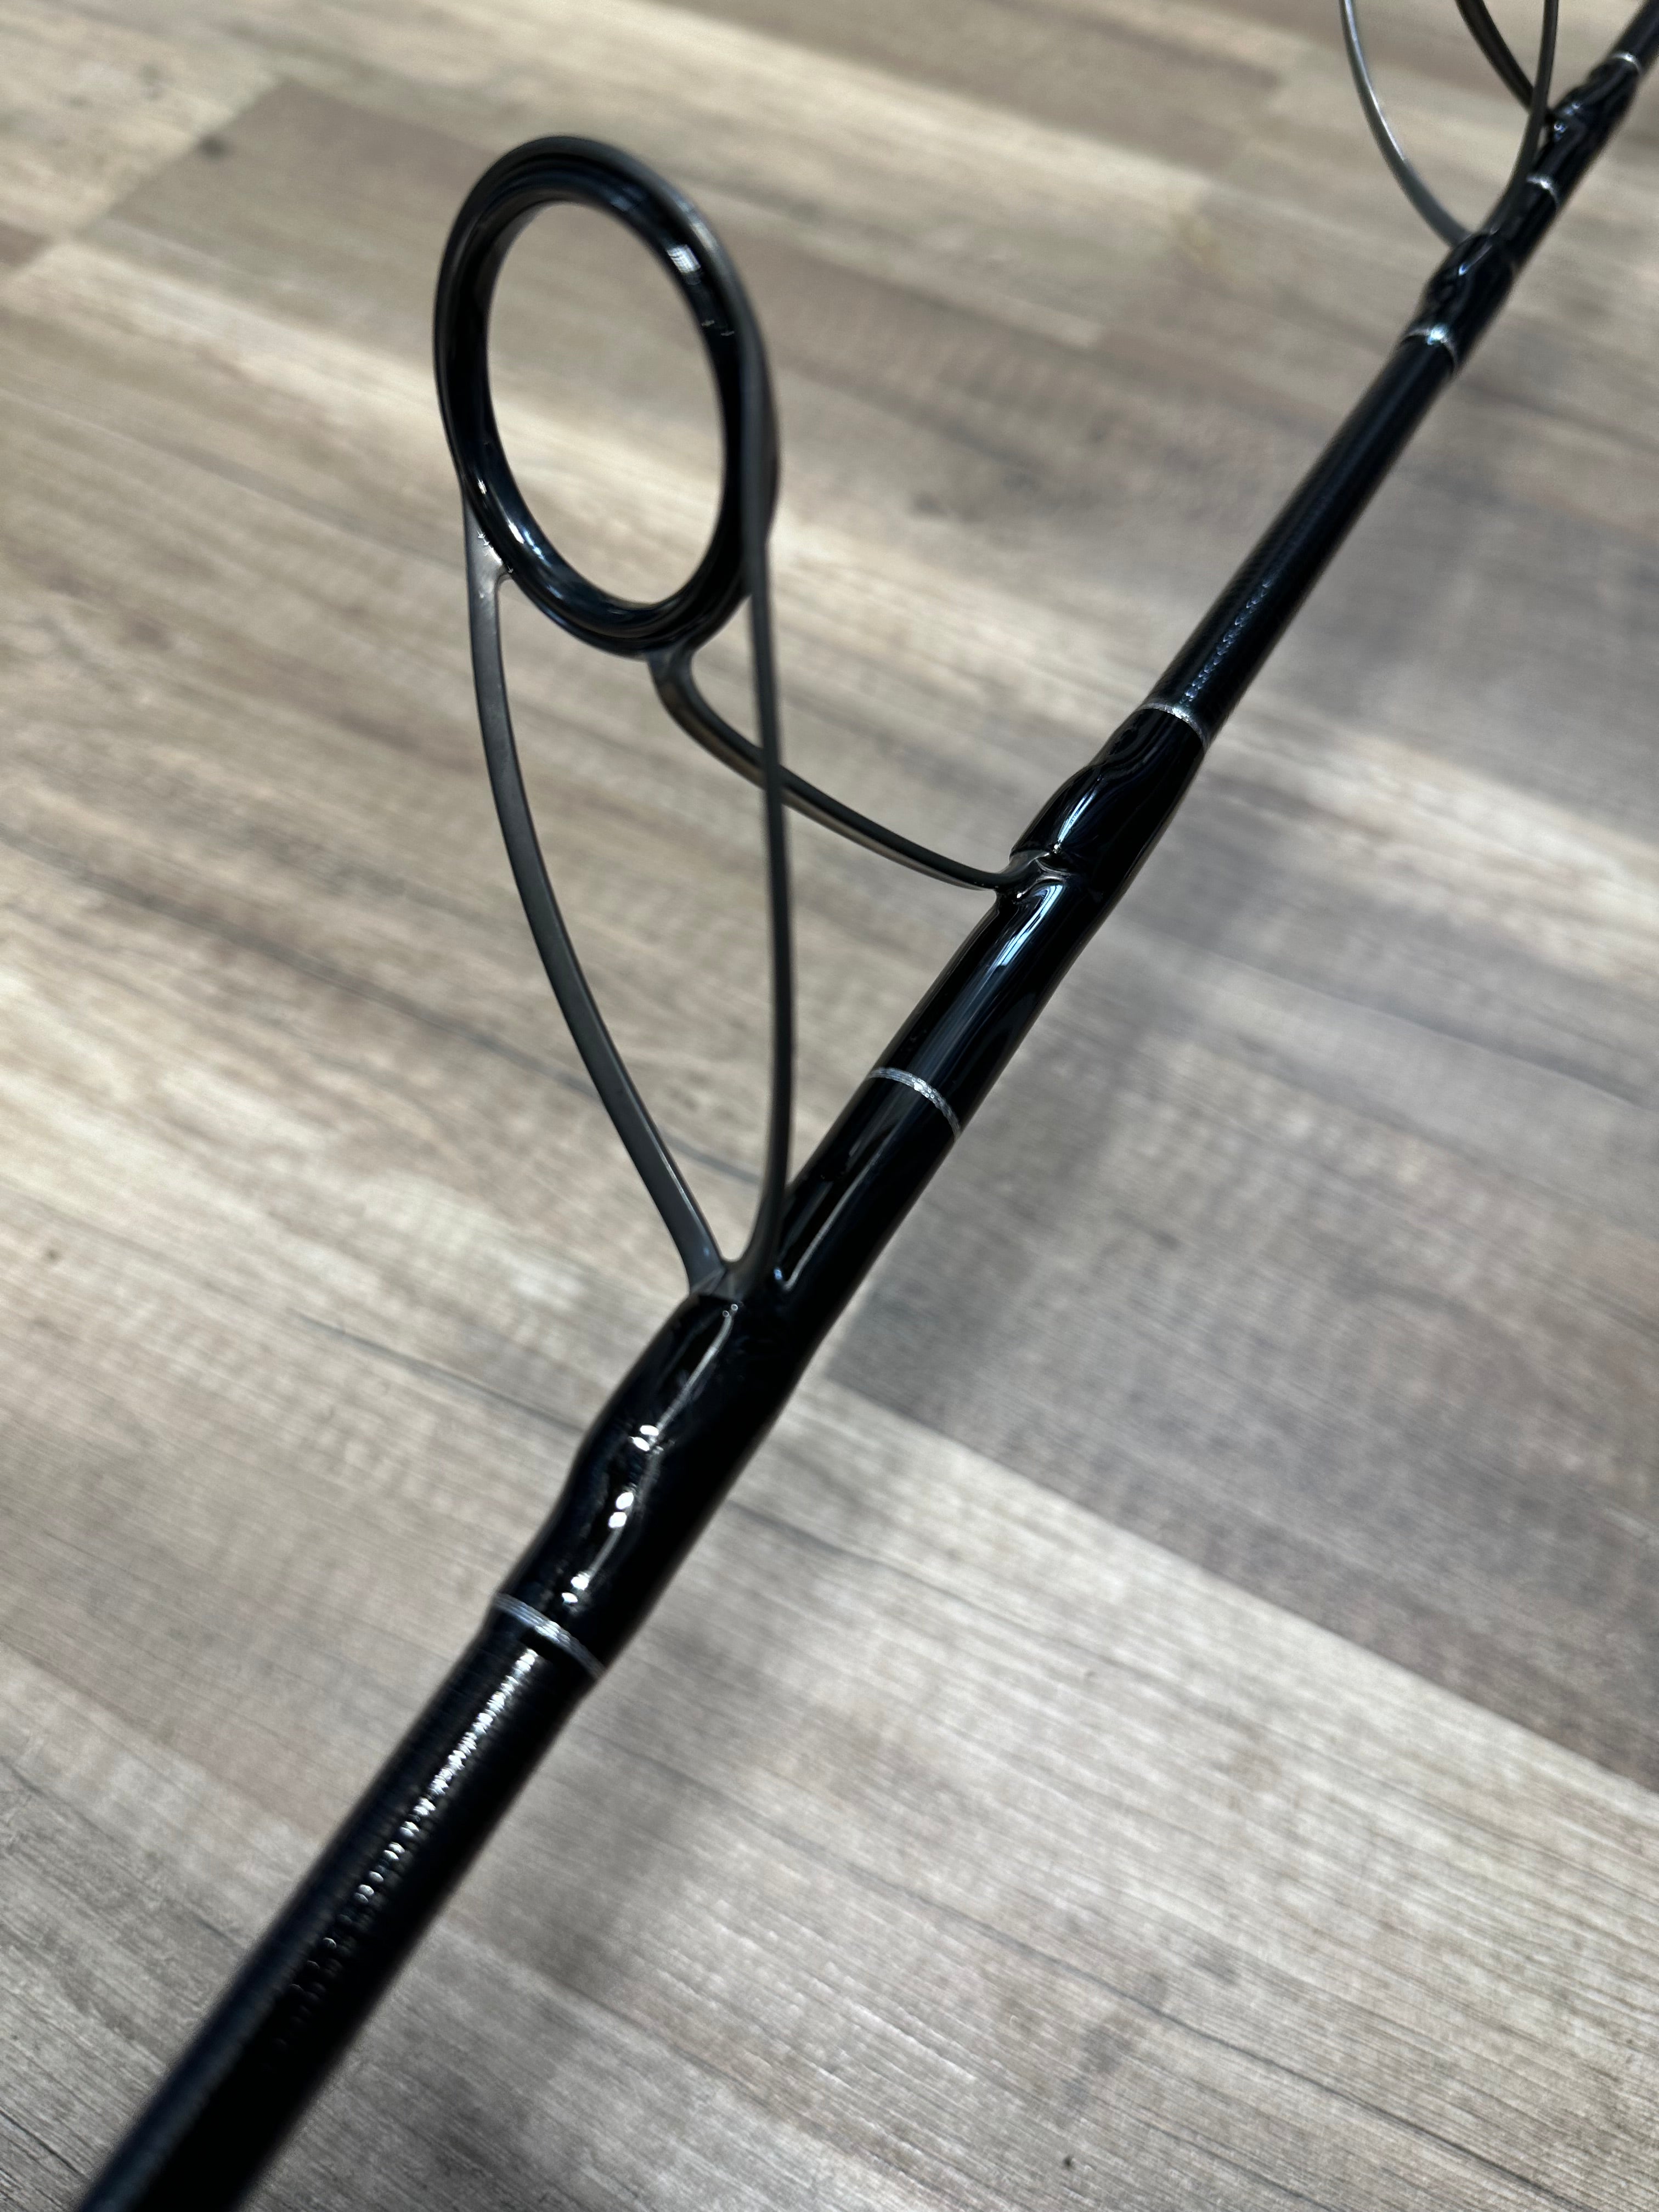 PRE-ORDER: Tuna Jigging Spinning Rod: Mod-Fast Action 5' 9 MH (4oz - 16oz) (SHIP Date 4/22)